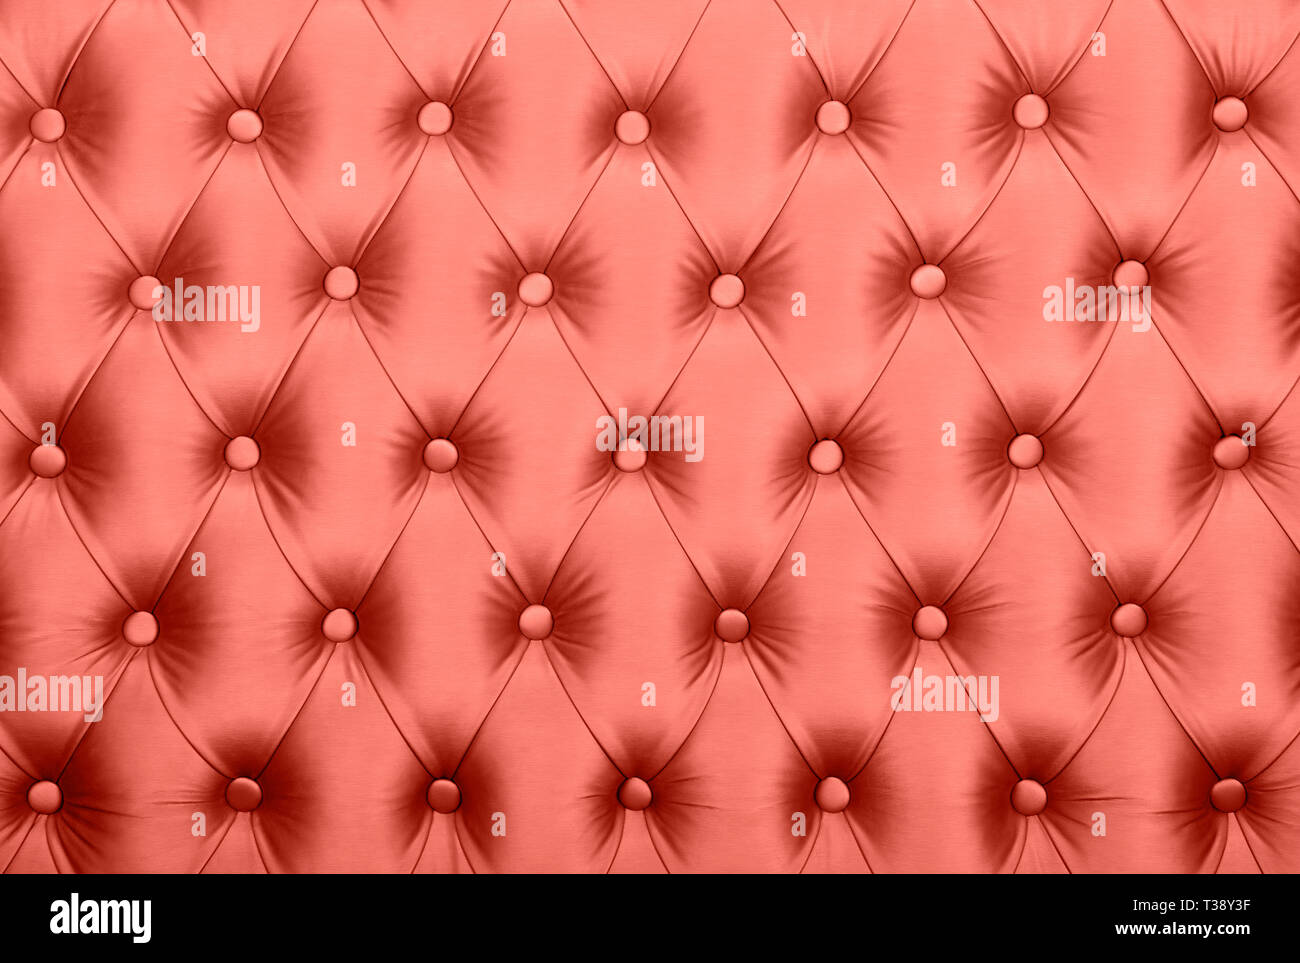 Coral toned pink leather capitone textile background, retro Chesterfield style checkered soft tufted fabric furniture decoration with buttons, close u Stock Photo